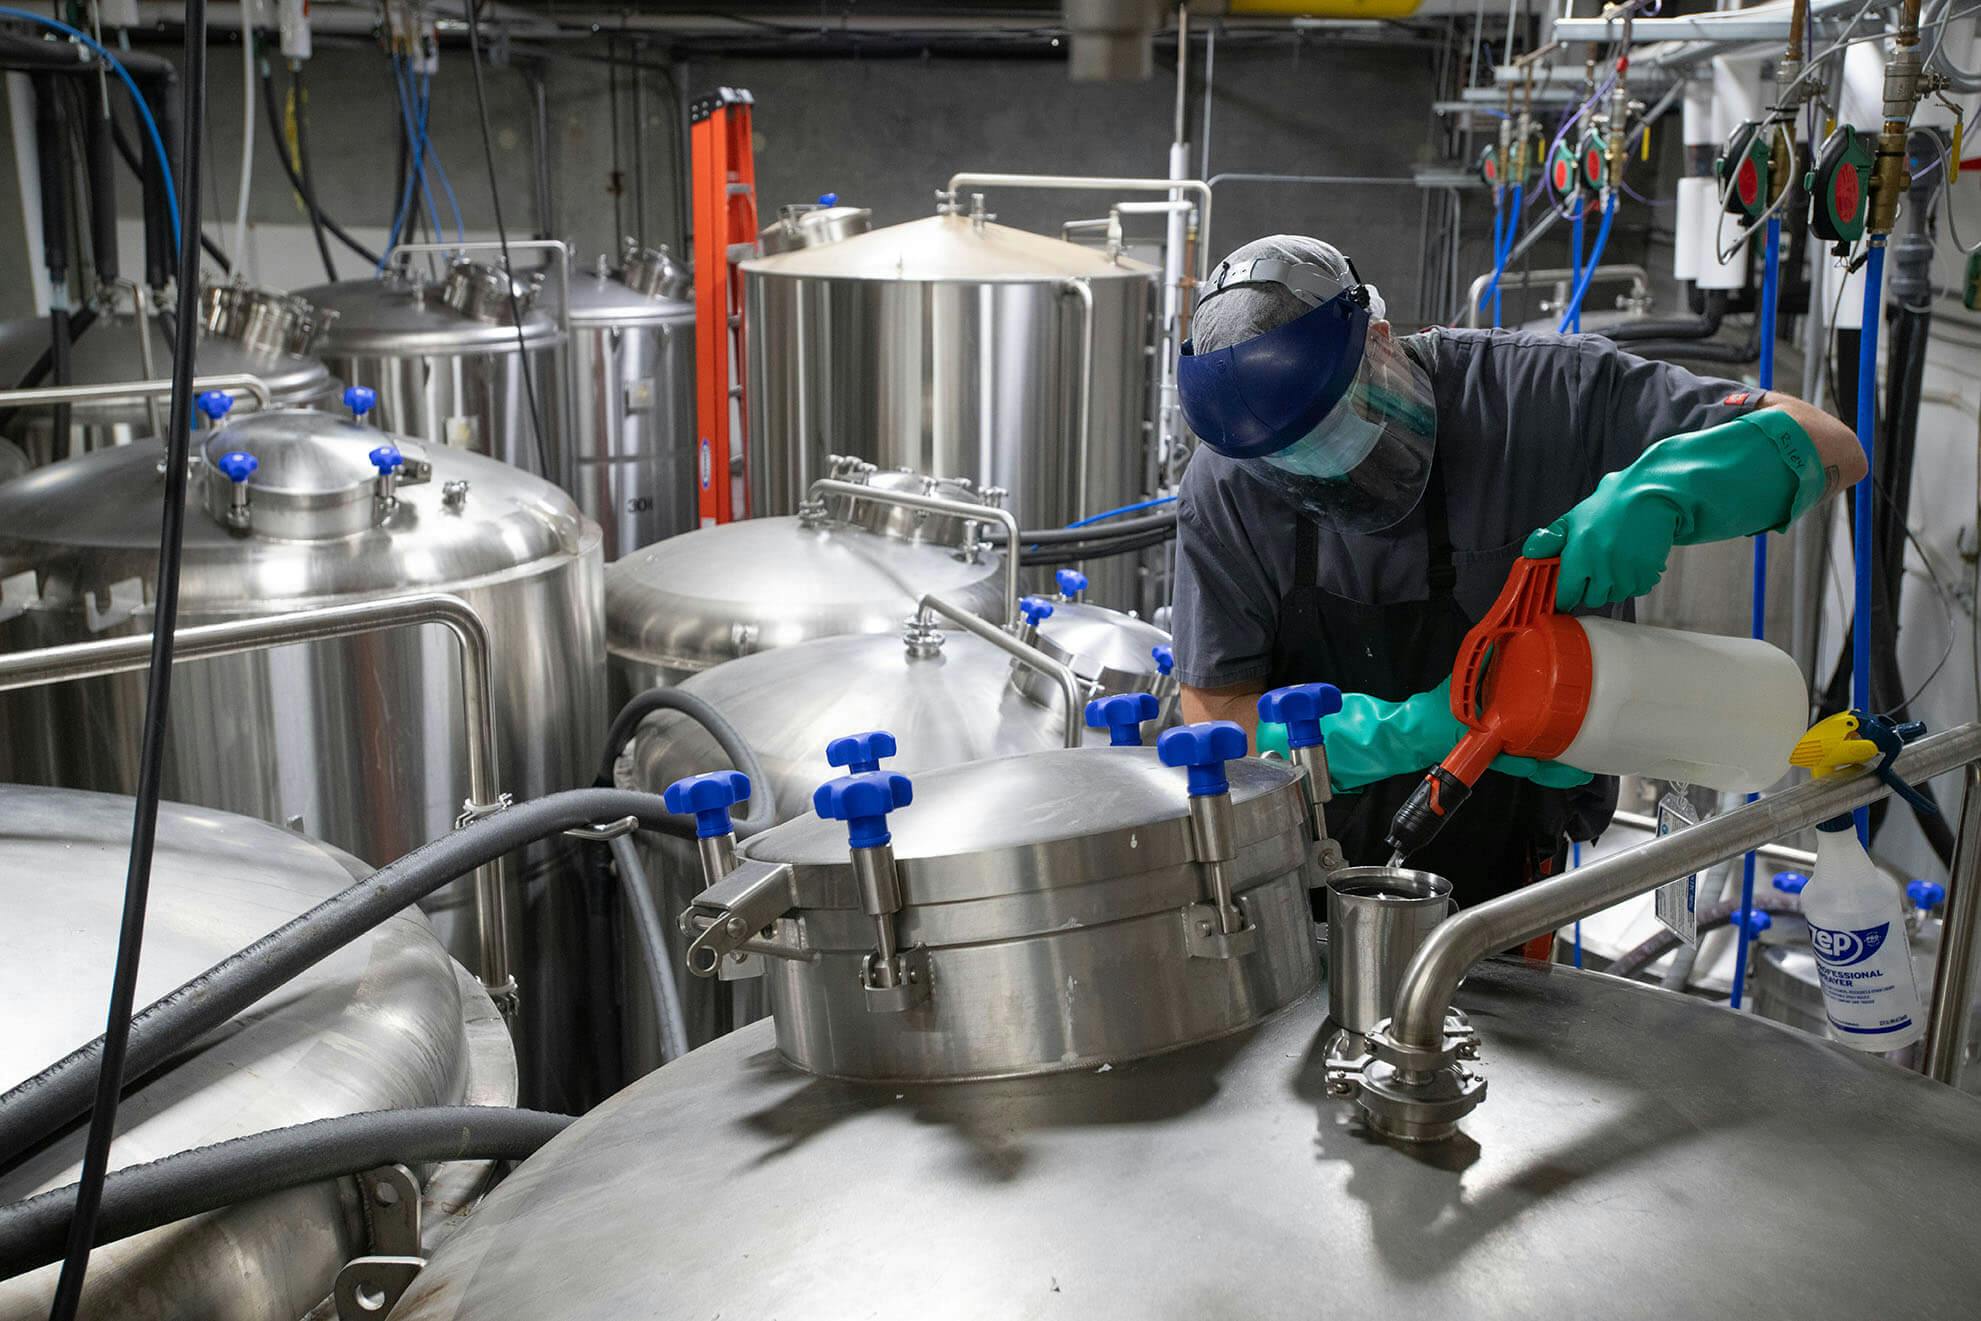 Brewer wearing protective gear operating at an Imperial Yeast facility.